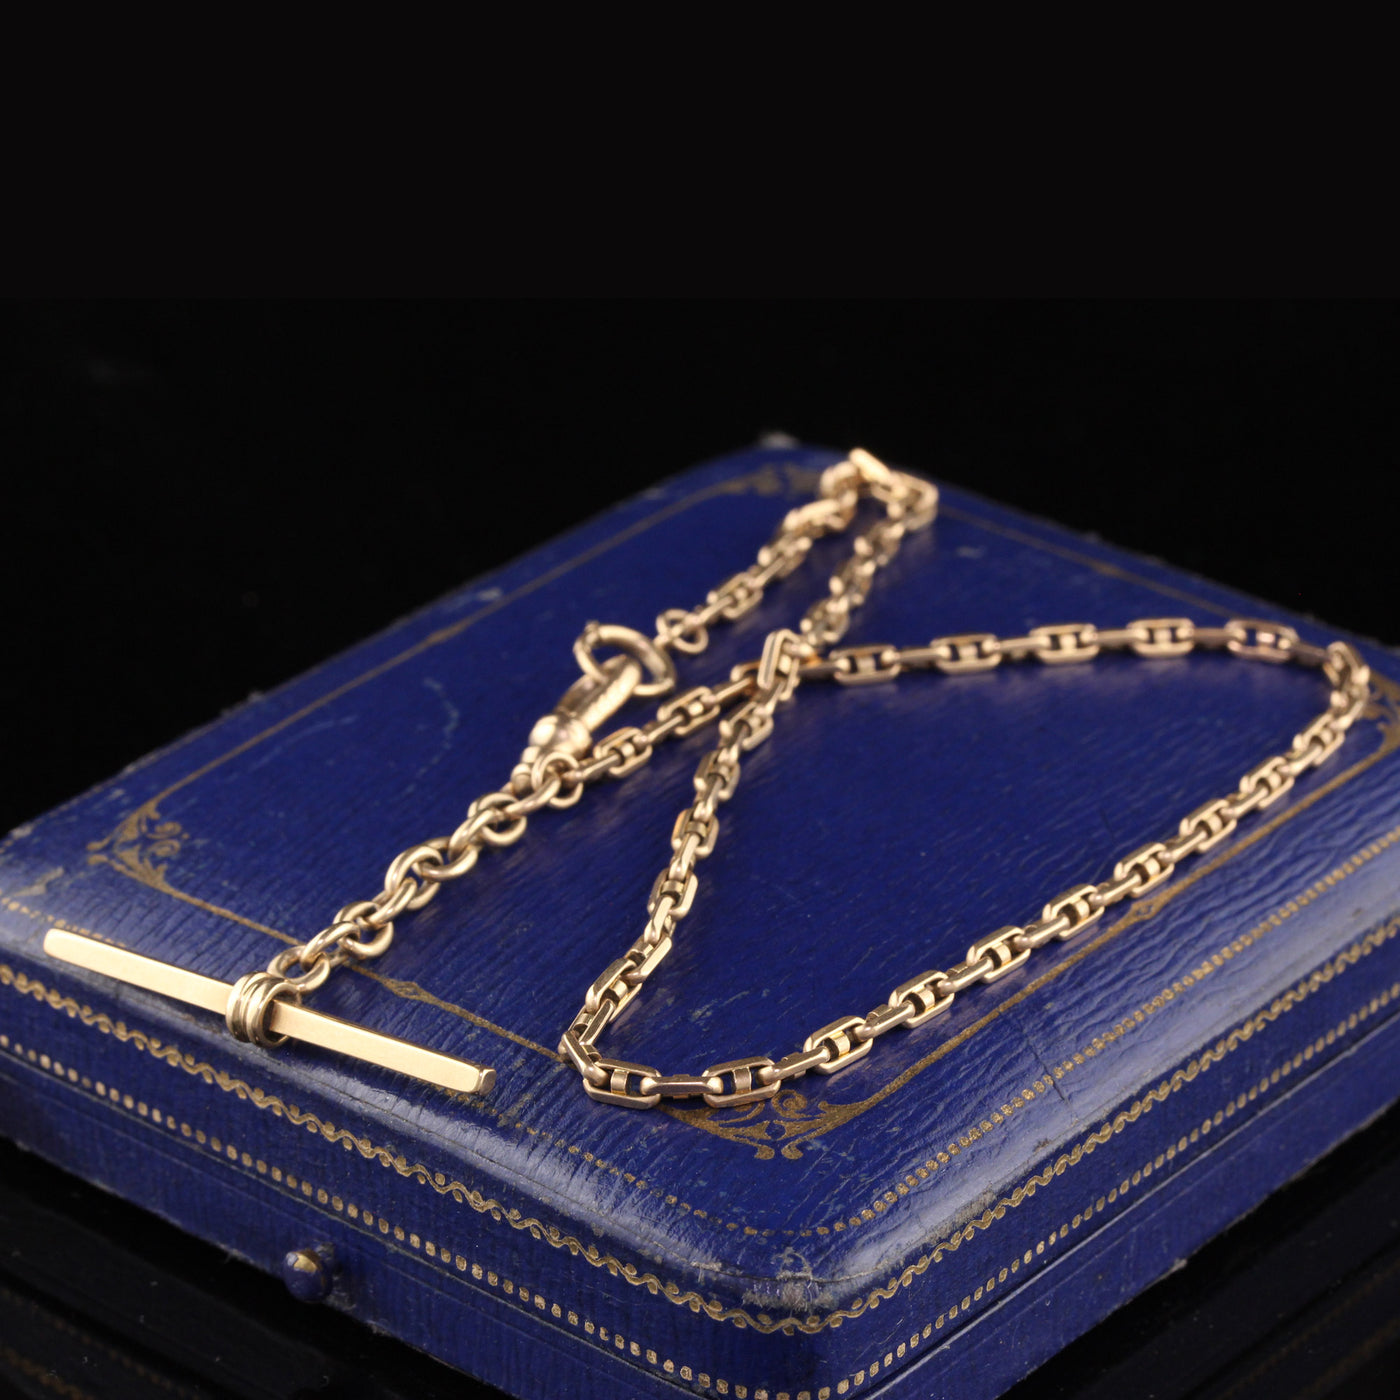 Antique Art Deco 14K Yellow Gold Chain Link Watch Fob Necklace